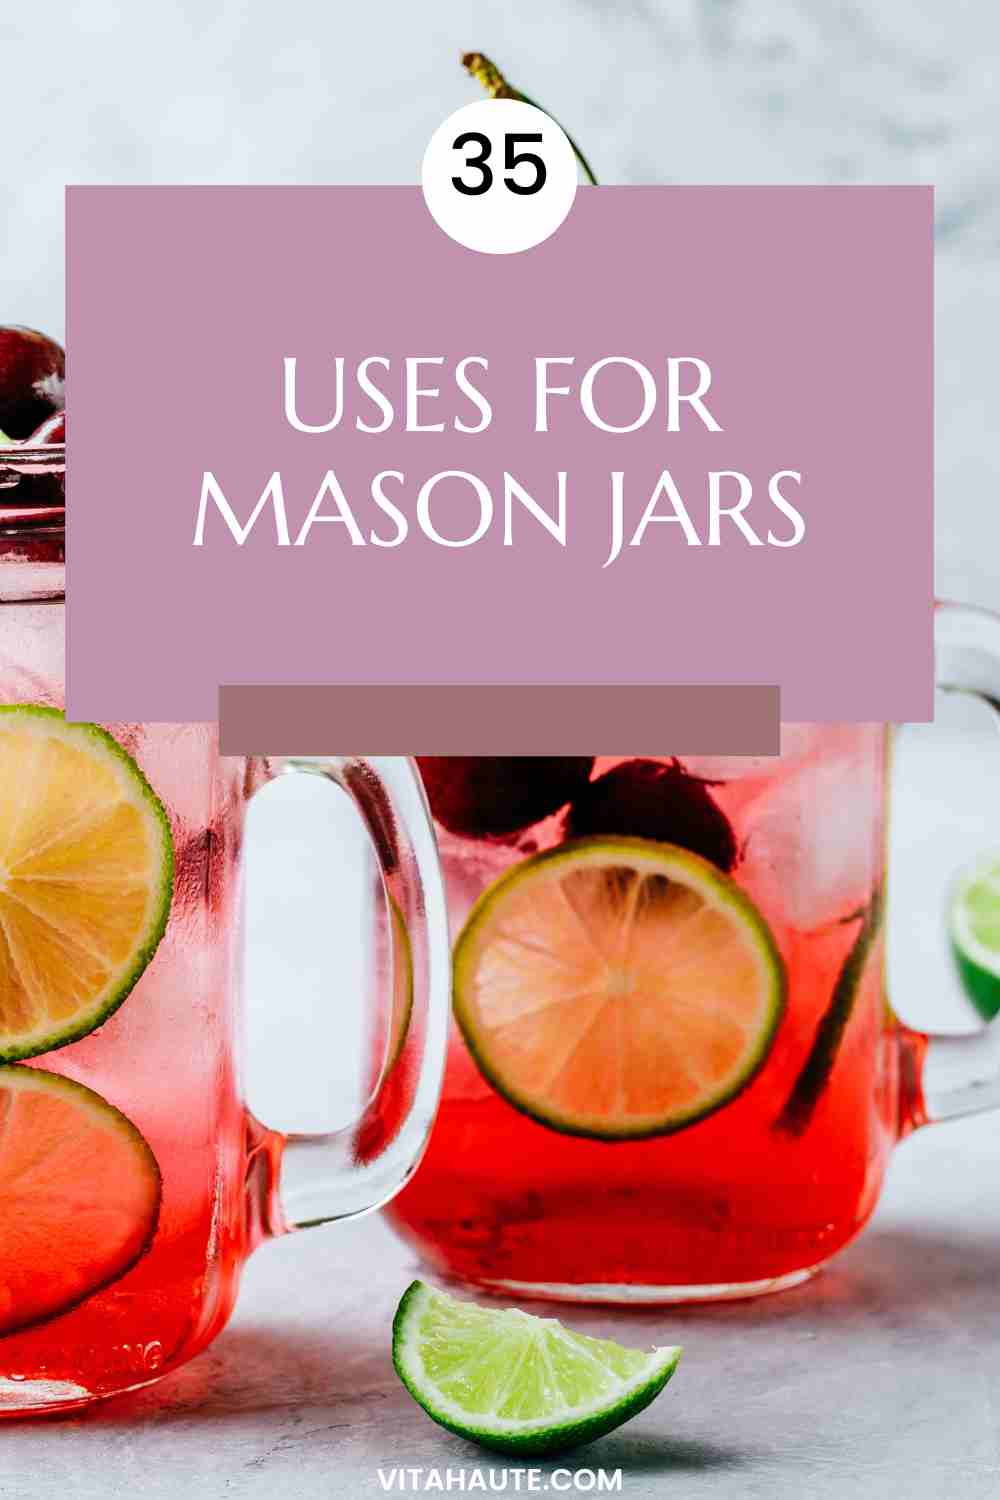 captivating array of Mason jars showcasing their versatility in many creative uses, from portable salad shakers to DIY herb gardens and more